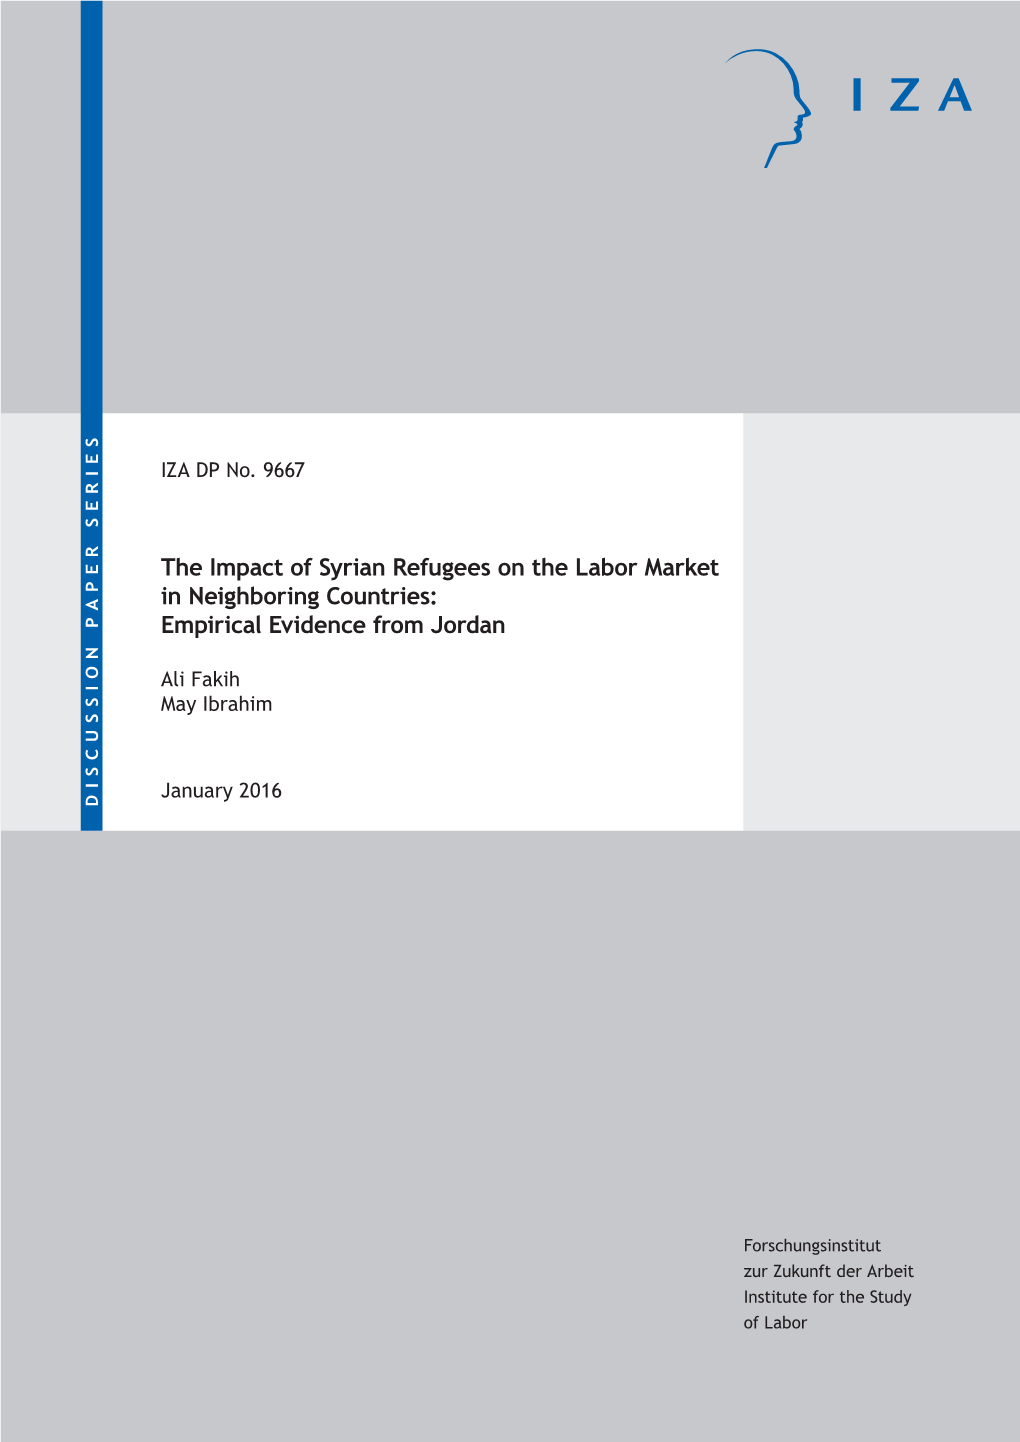 The Impact of Syrian Refugees on the Labor Market in Neighboring Countries: Empirical Evidence from Jordan